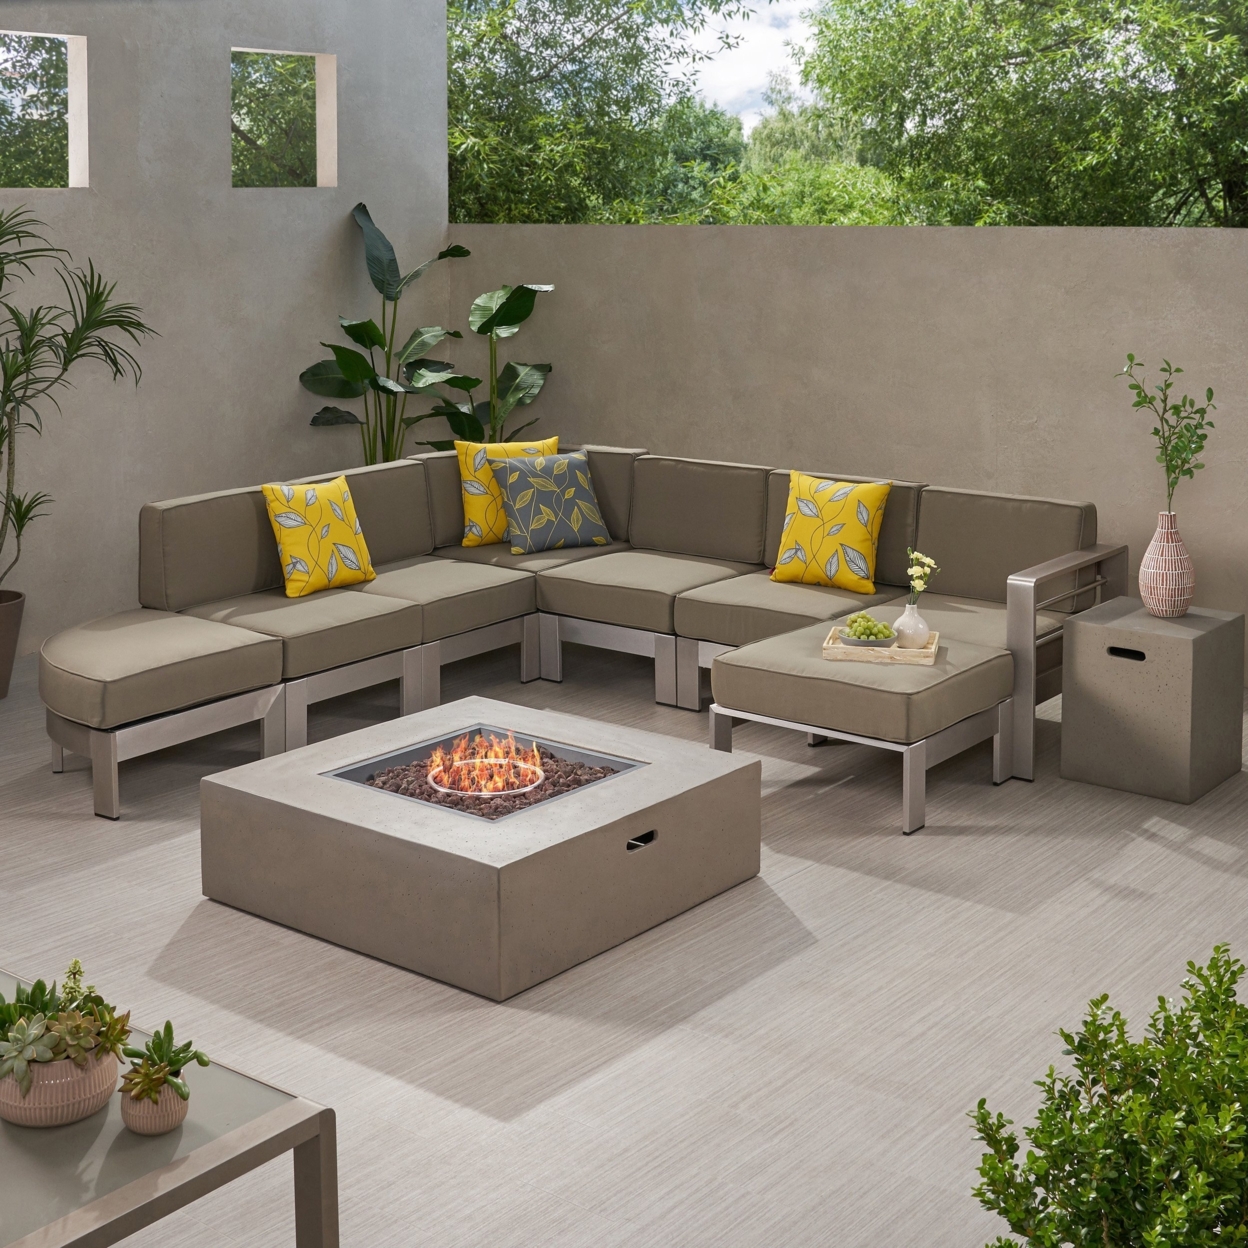 Cherie Half Round 5 Seater Sectional Set With Fire Pit And Tank Holder - Light Gray